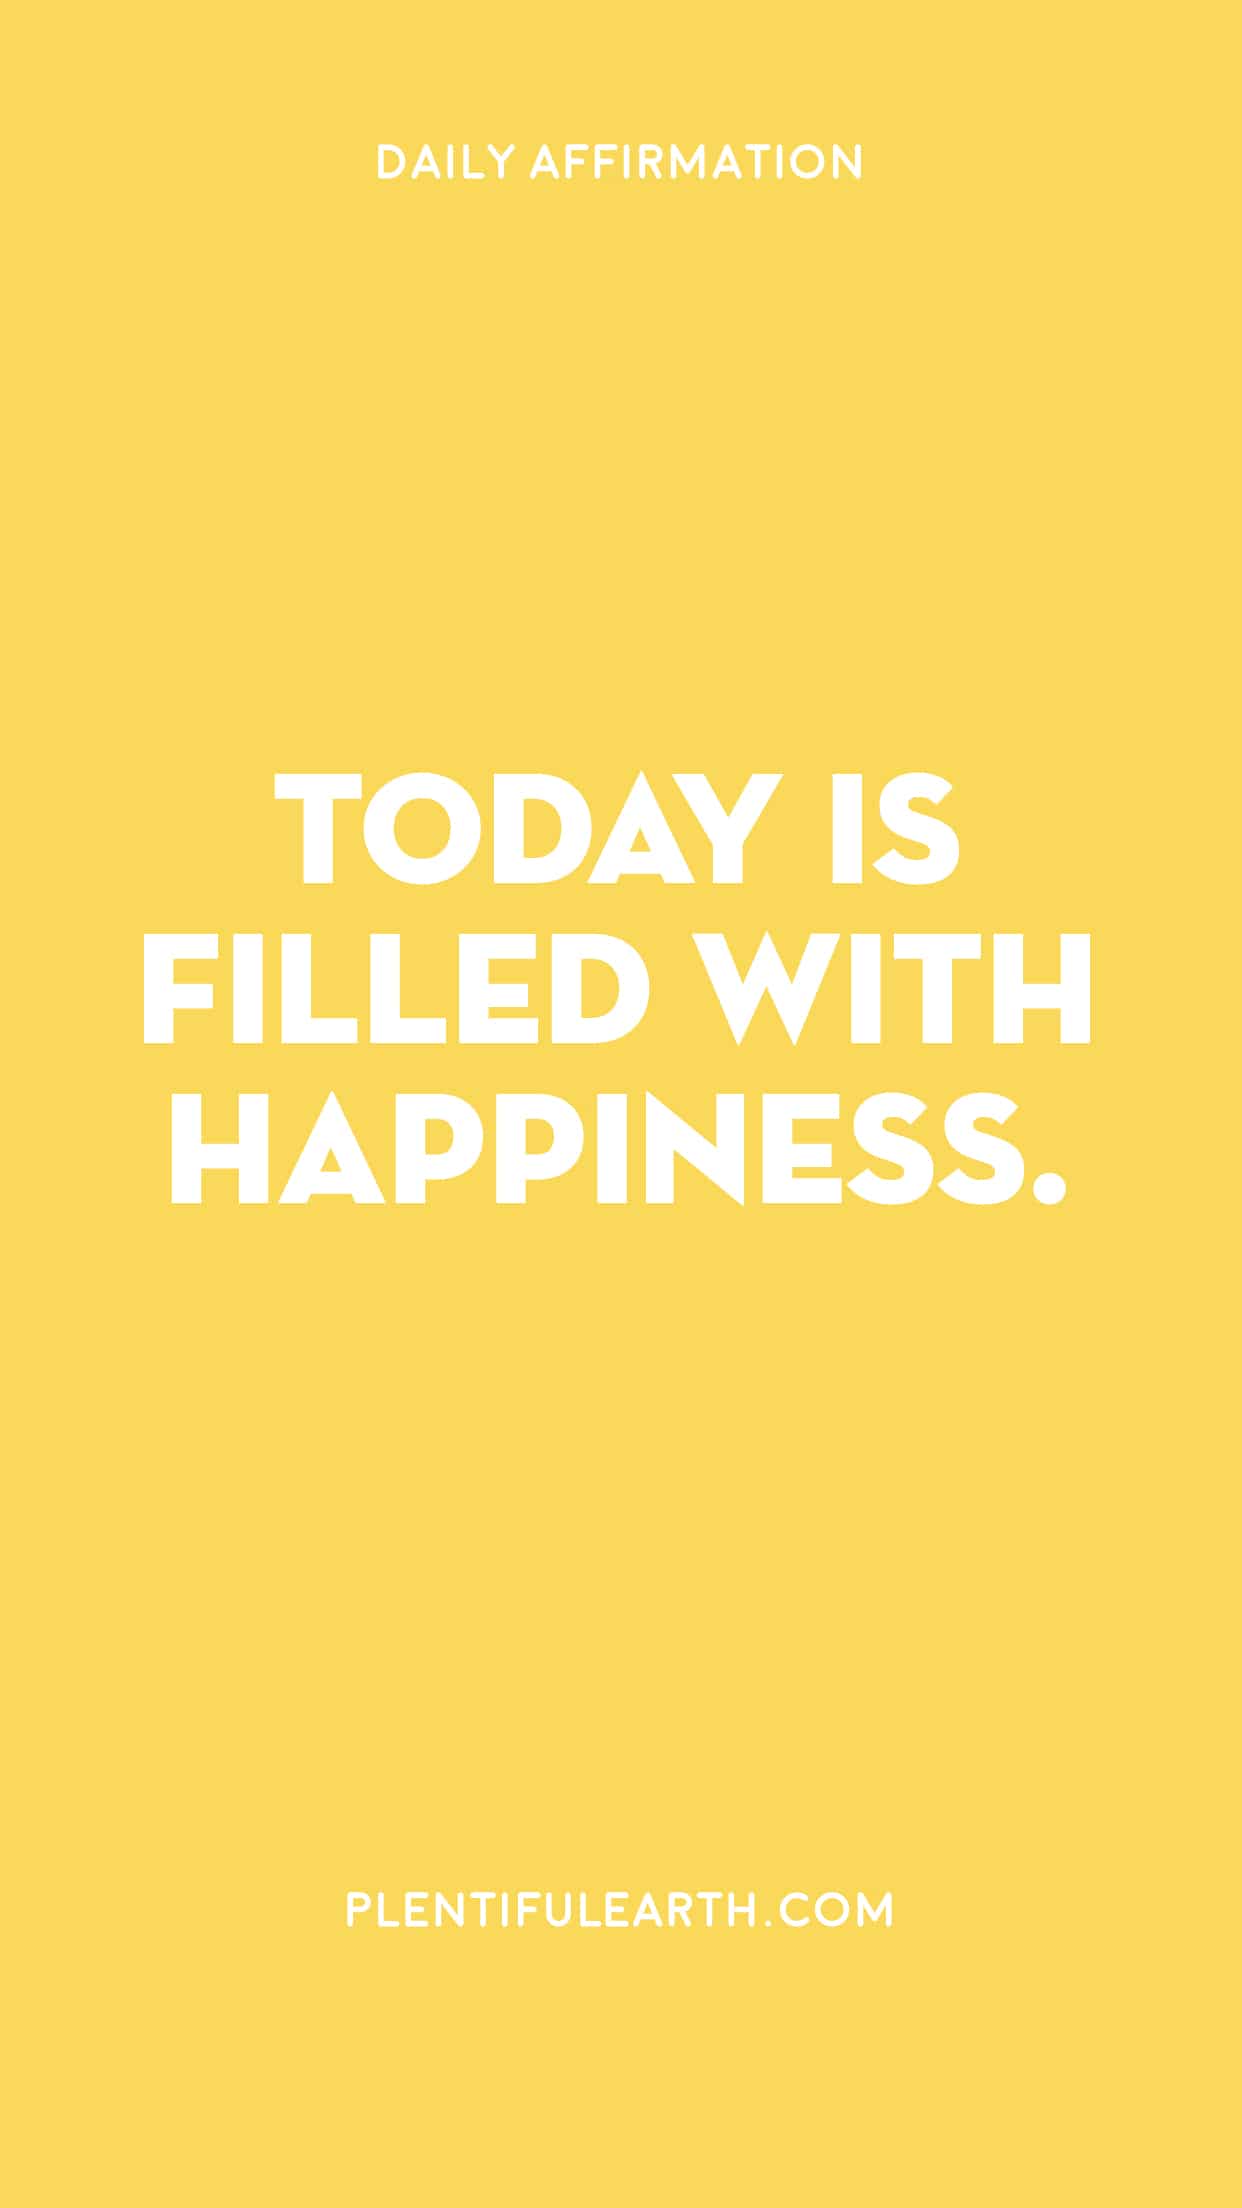 An inspiring daily affirmation on a yellow background: 'today is filled with happiness.' - plentifulearth.com, your metaphysical shop.